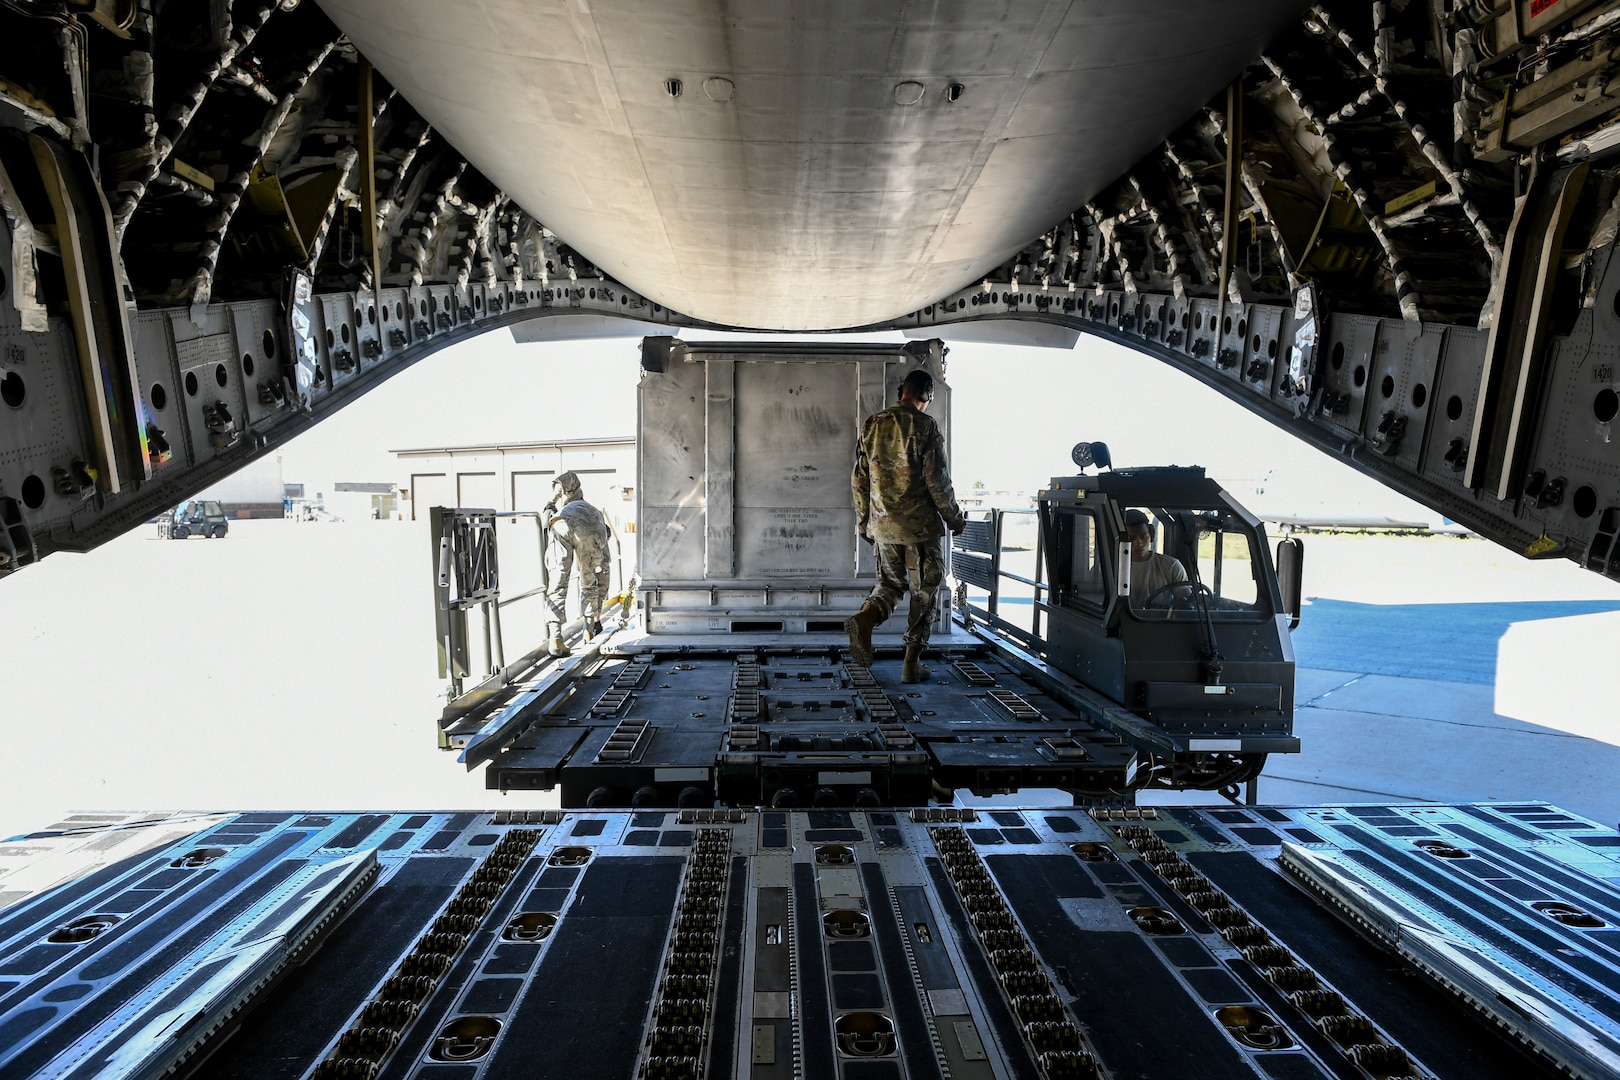 Airmen with the 75th Logistics Readiness Squadron unload cargo from a C-17 Globemaster III at Hill Air Force Base, Utah, Aug. 9, 2019. The C-17 is attached to the Reserve 89th Airlift Squadron assigned to the 445th Aircraft Wing out of Wright-Patterson AFB, Ohio. (U.S. Air Force photo by Cynthia Griggs)